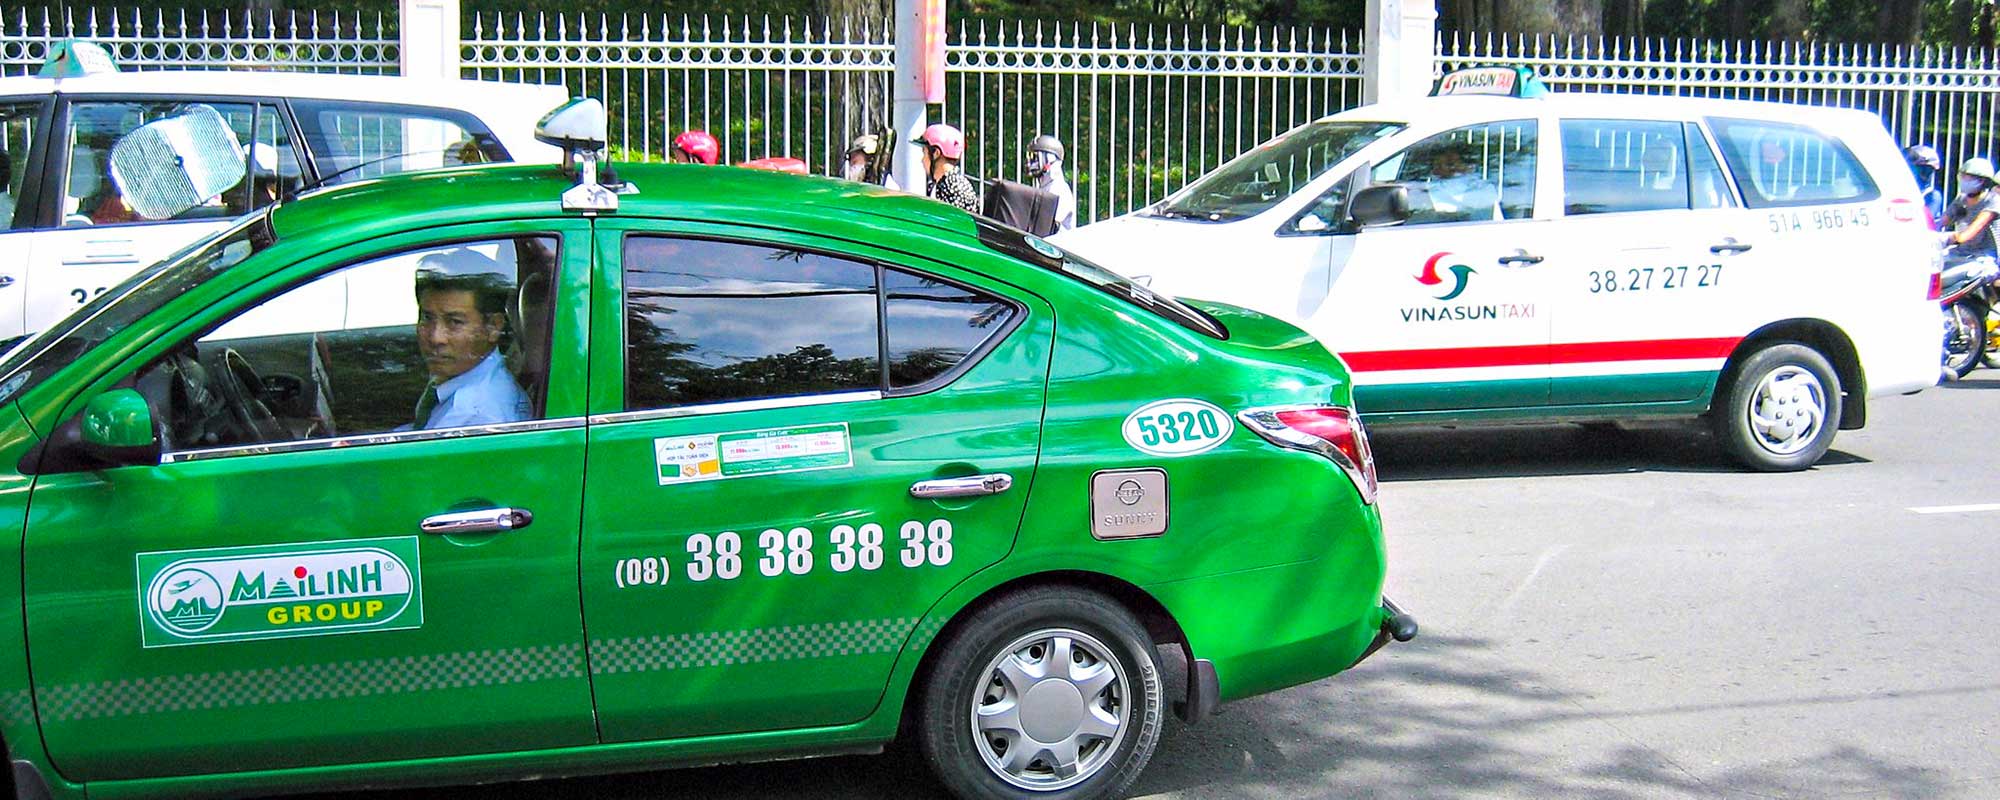 Taxis are plentiful in major towns and cities in Vietnam